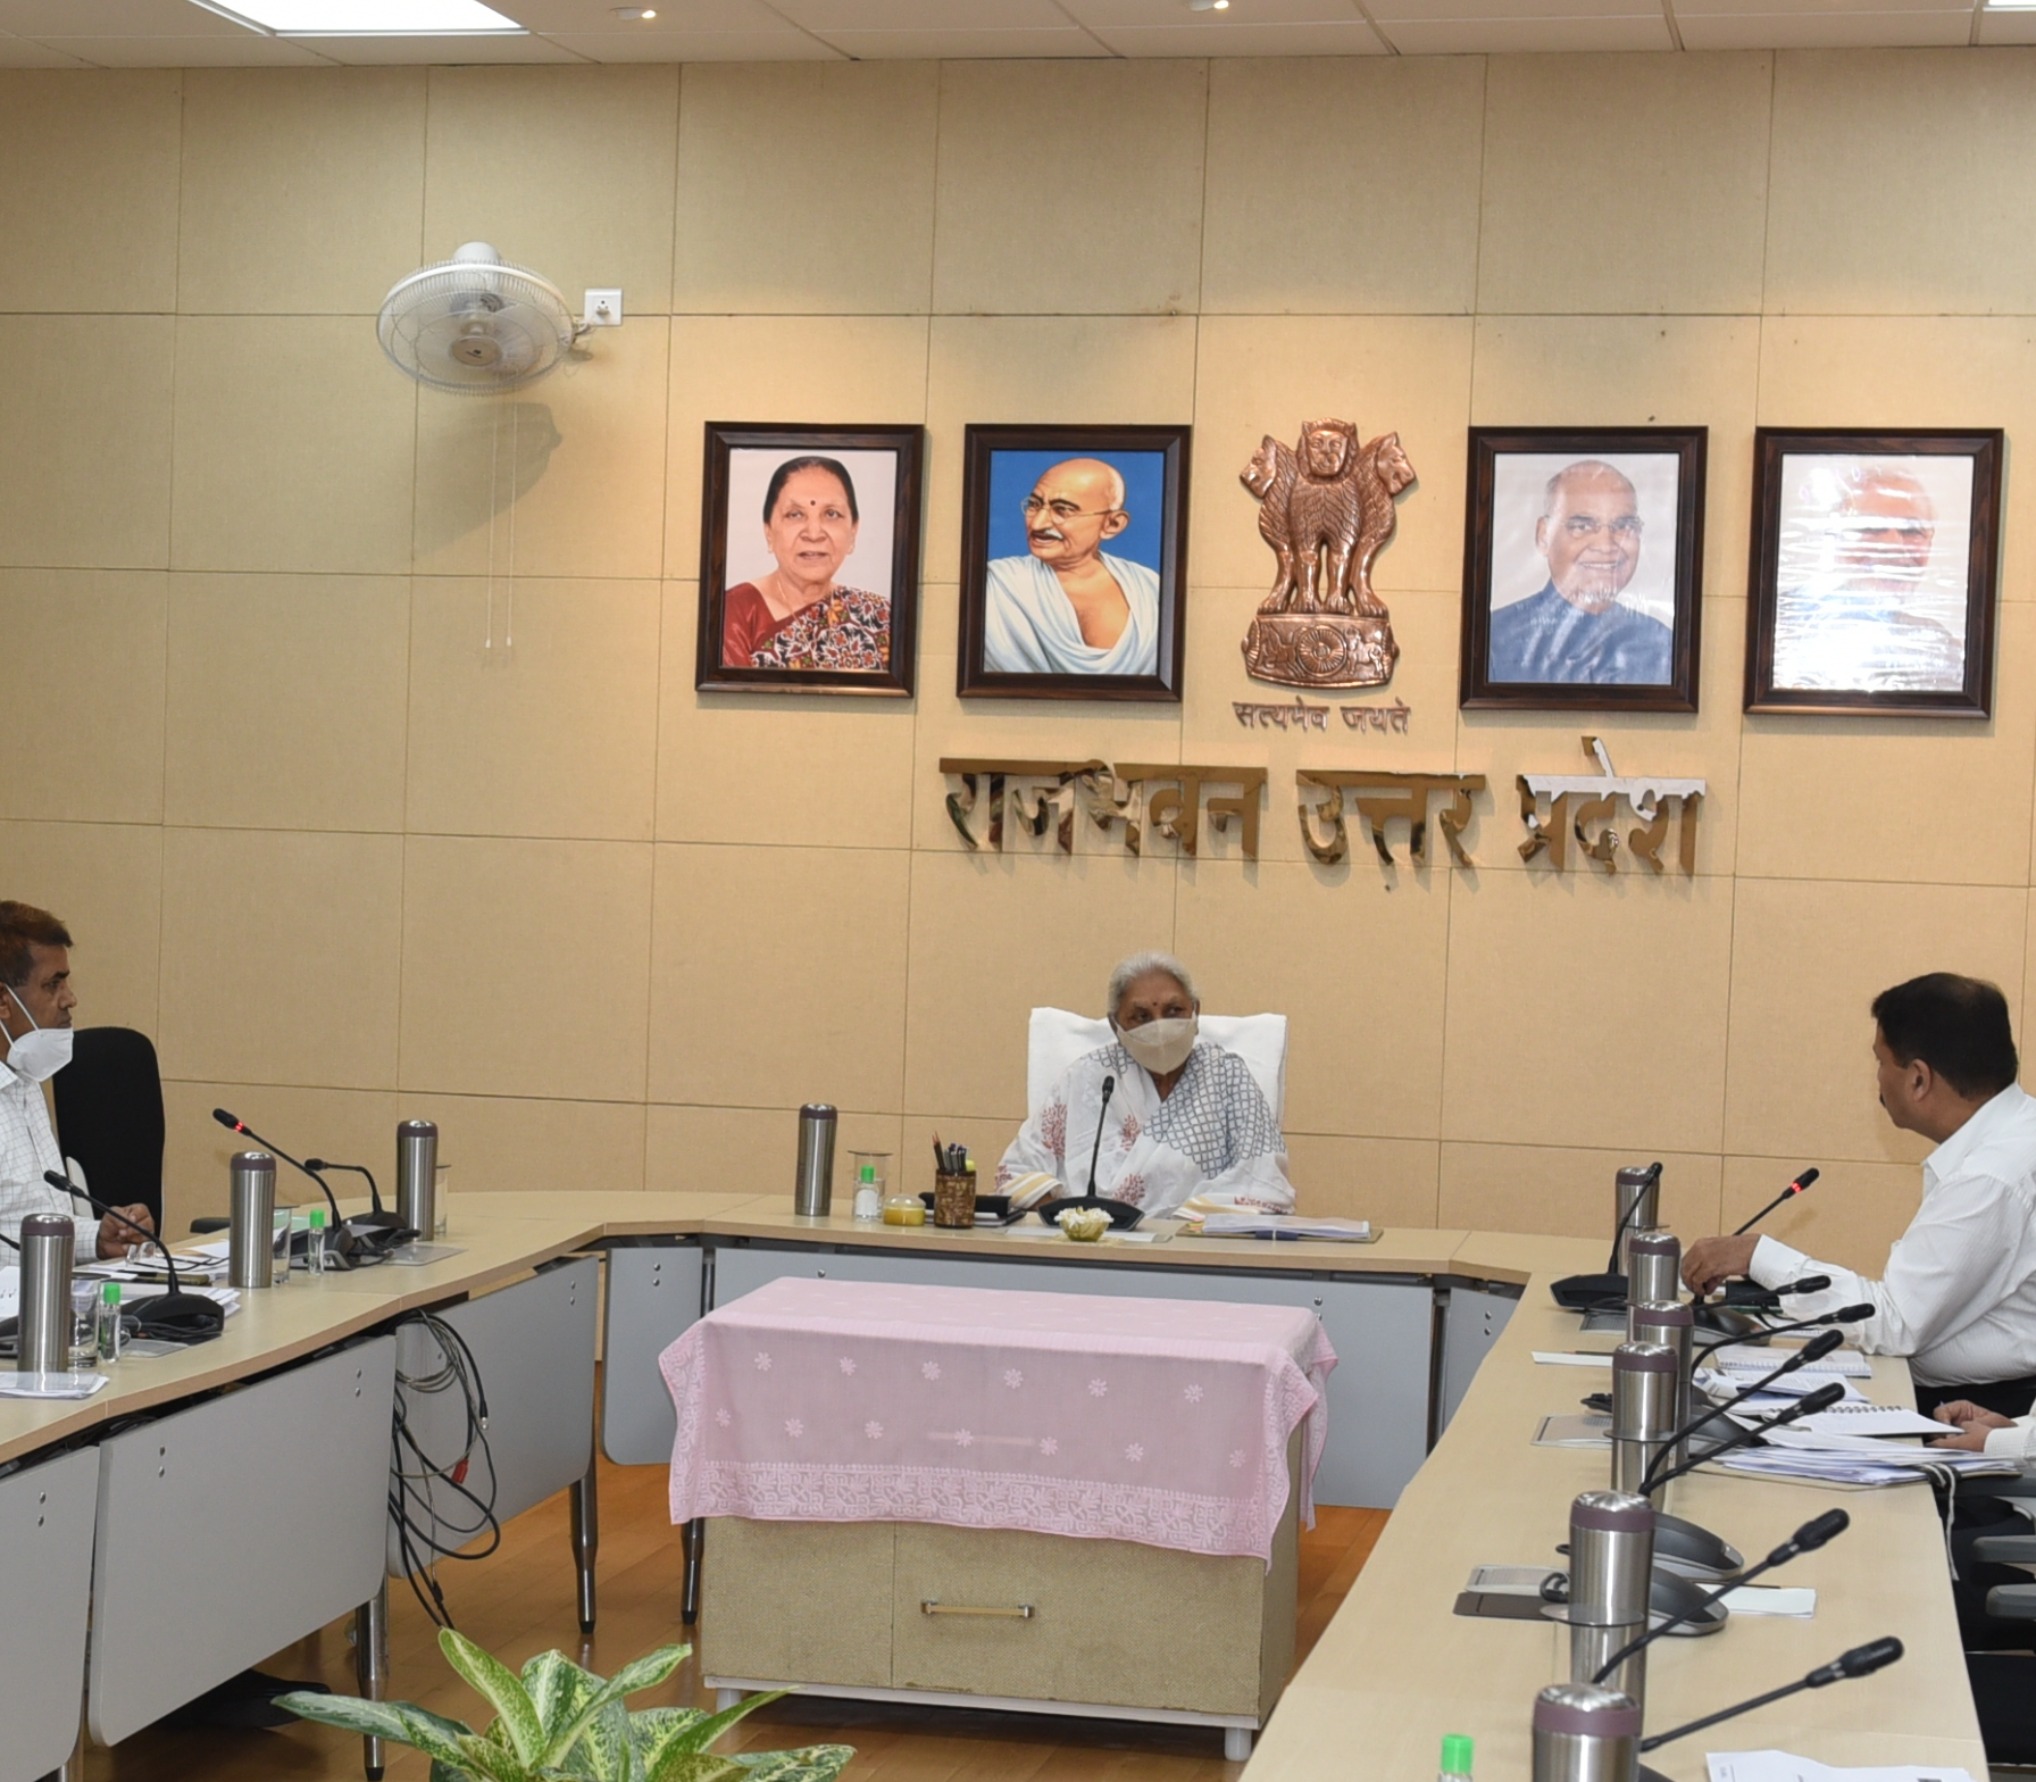 The Governor witnessed the NAAC presentation of Dr. Shakuntala Misra National Rehabilitation University, Lucknow.